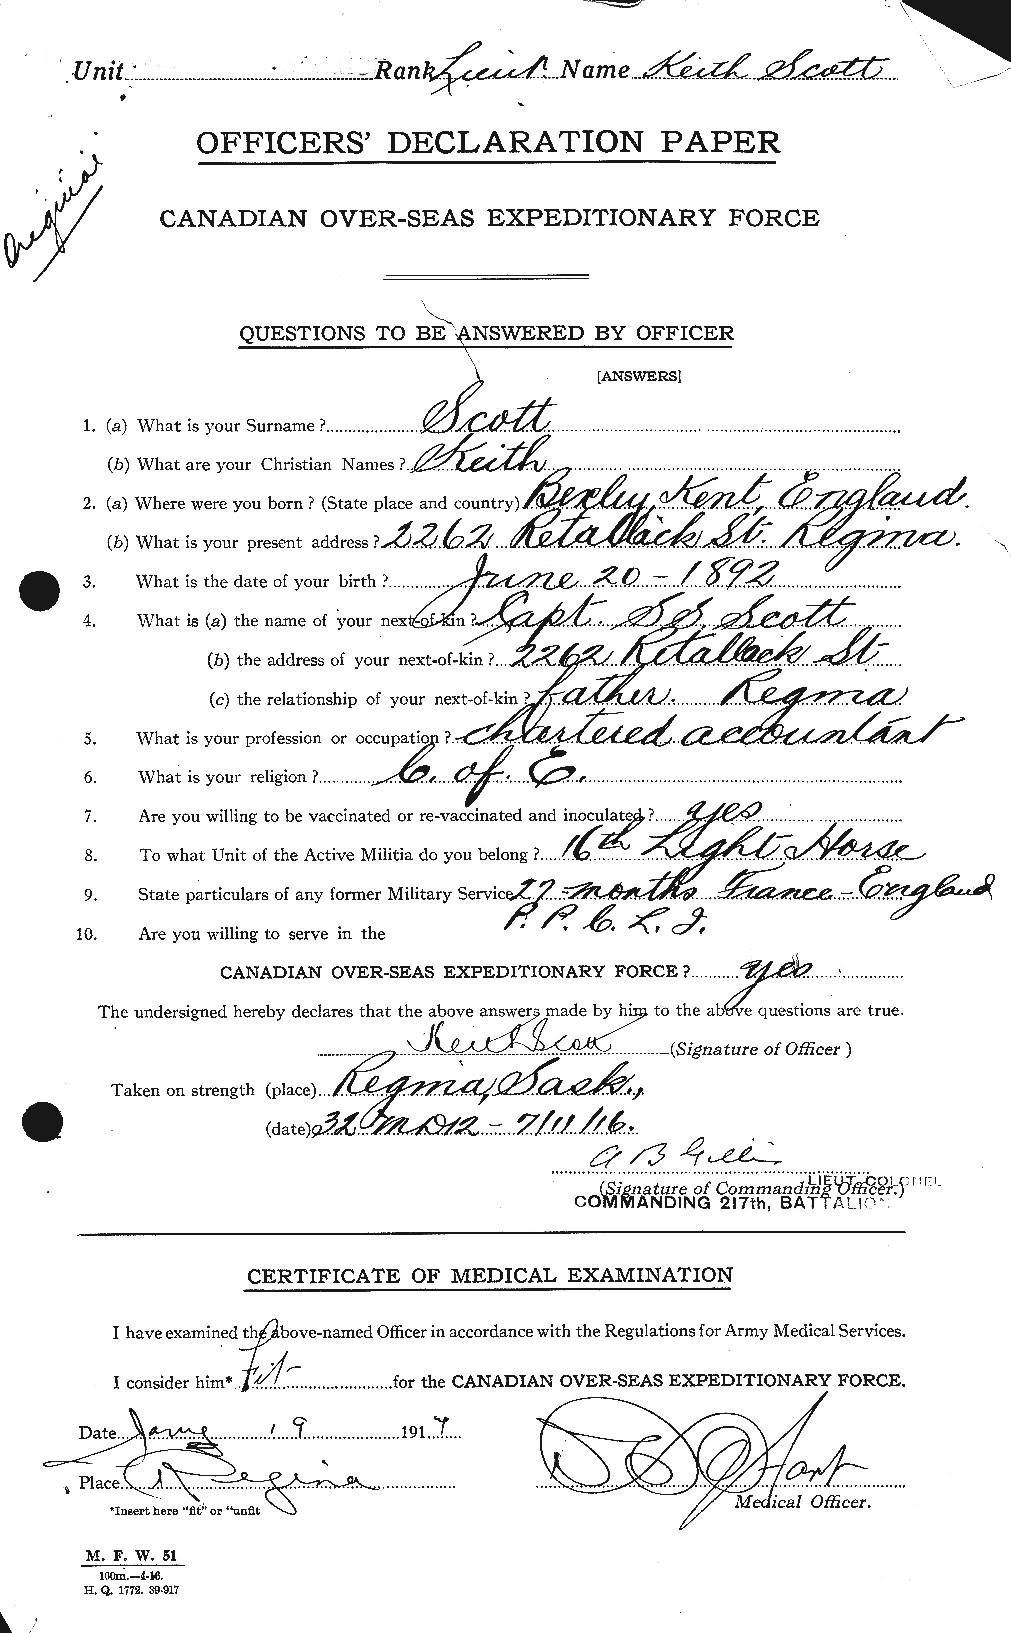 Personnel Records of the First World War - CEF 084157a